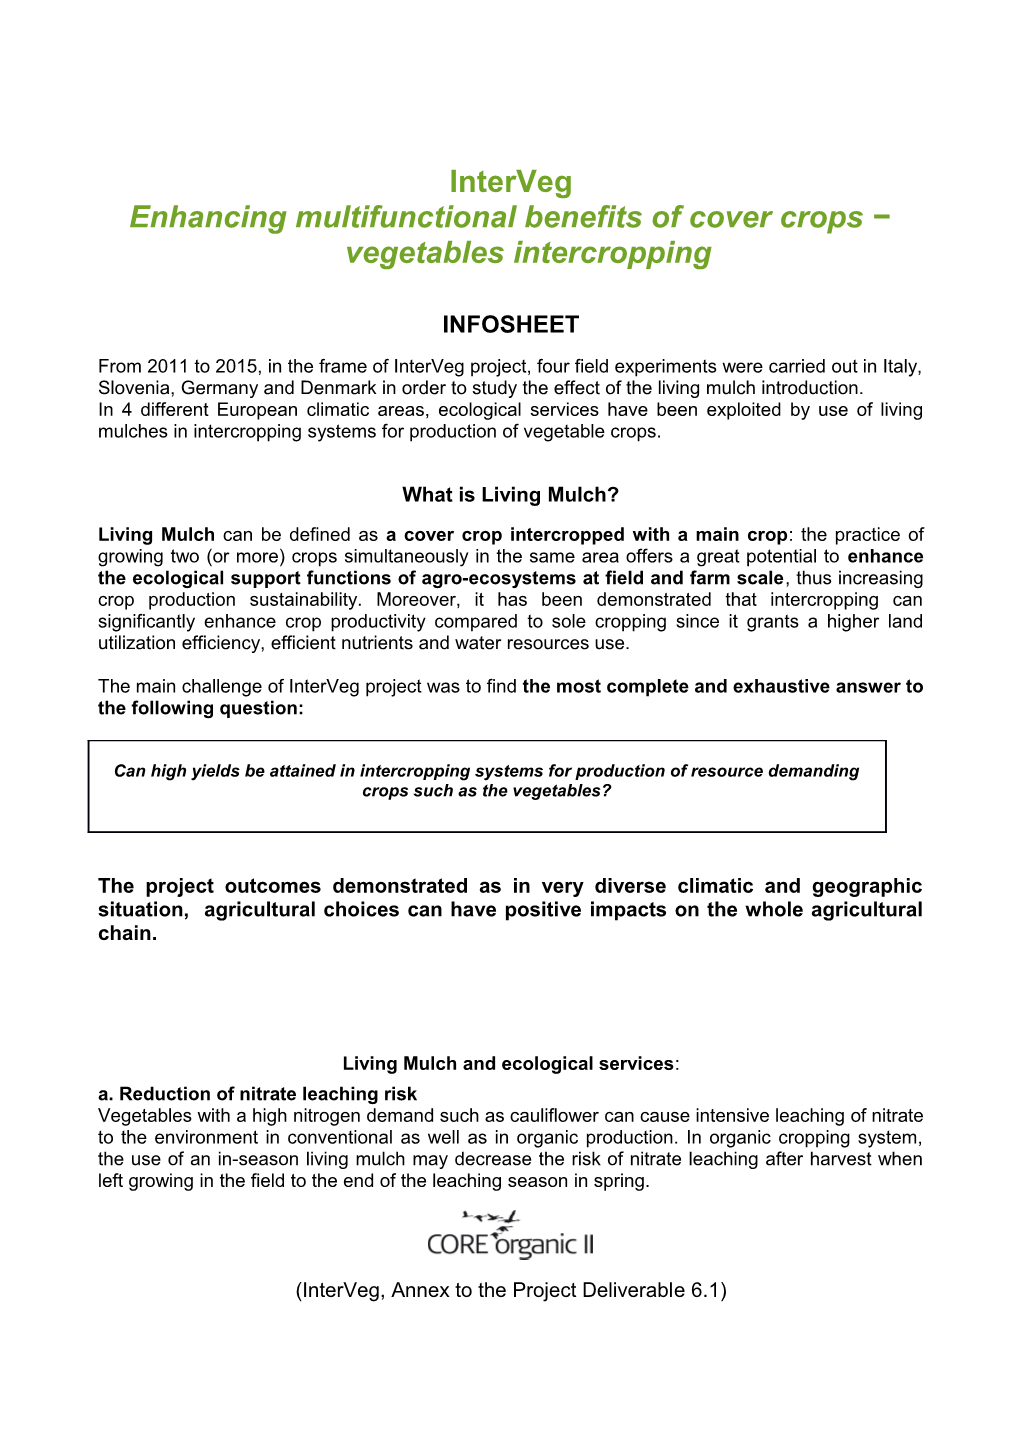 Enhancing Multifunctional Benefits of Cover Crops Vegetables Intercropping